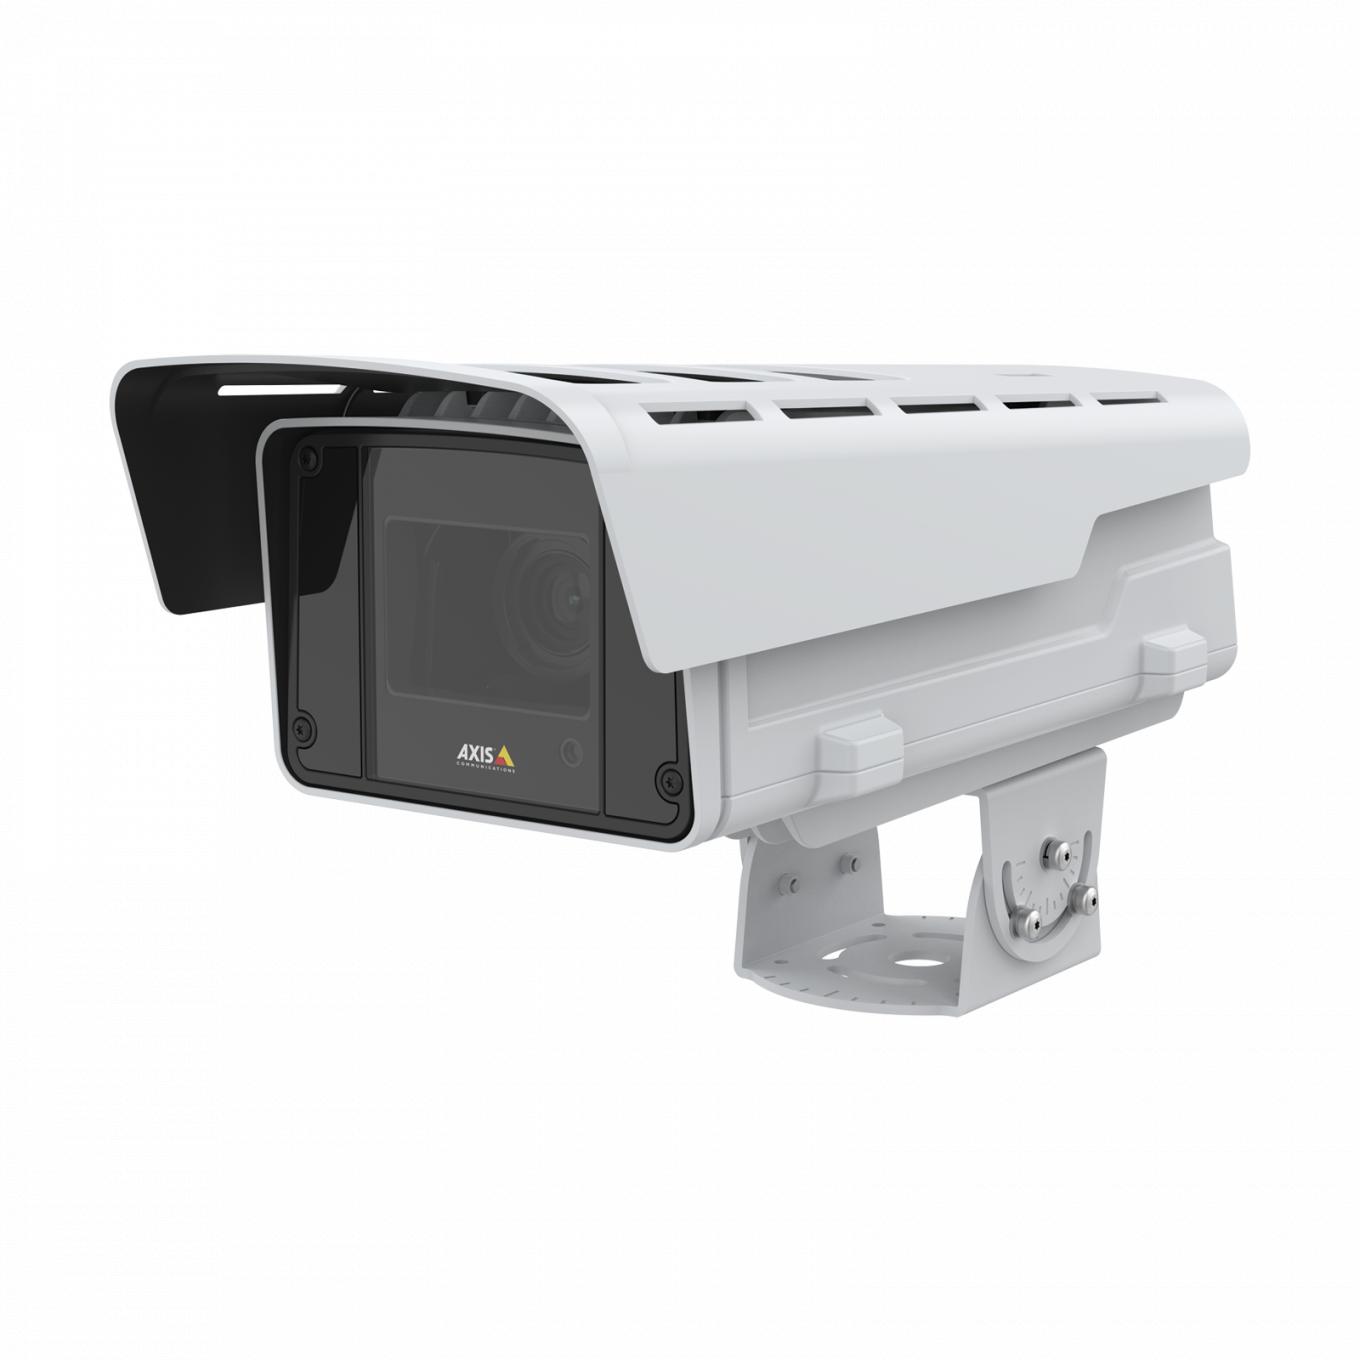 AXIS TQ1501-E Crane and Traffic Mount mit AXIS Q1615-LE MkIII Network Camera